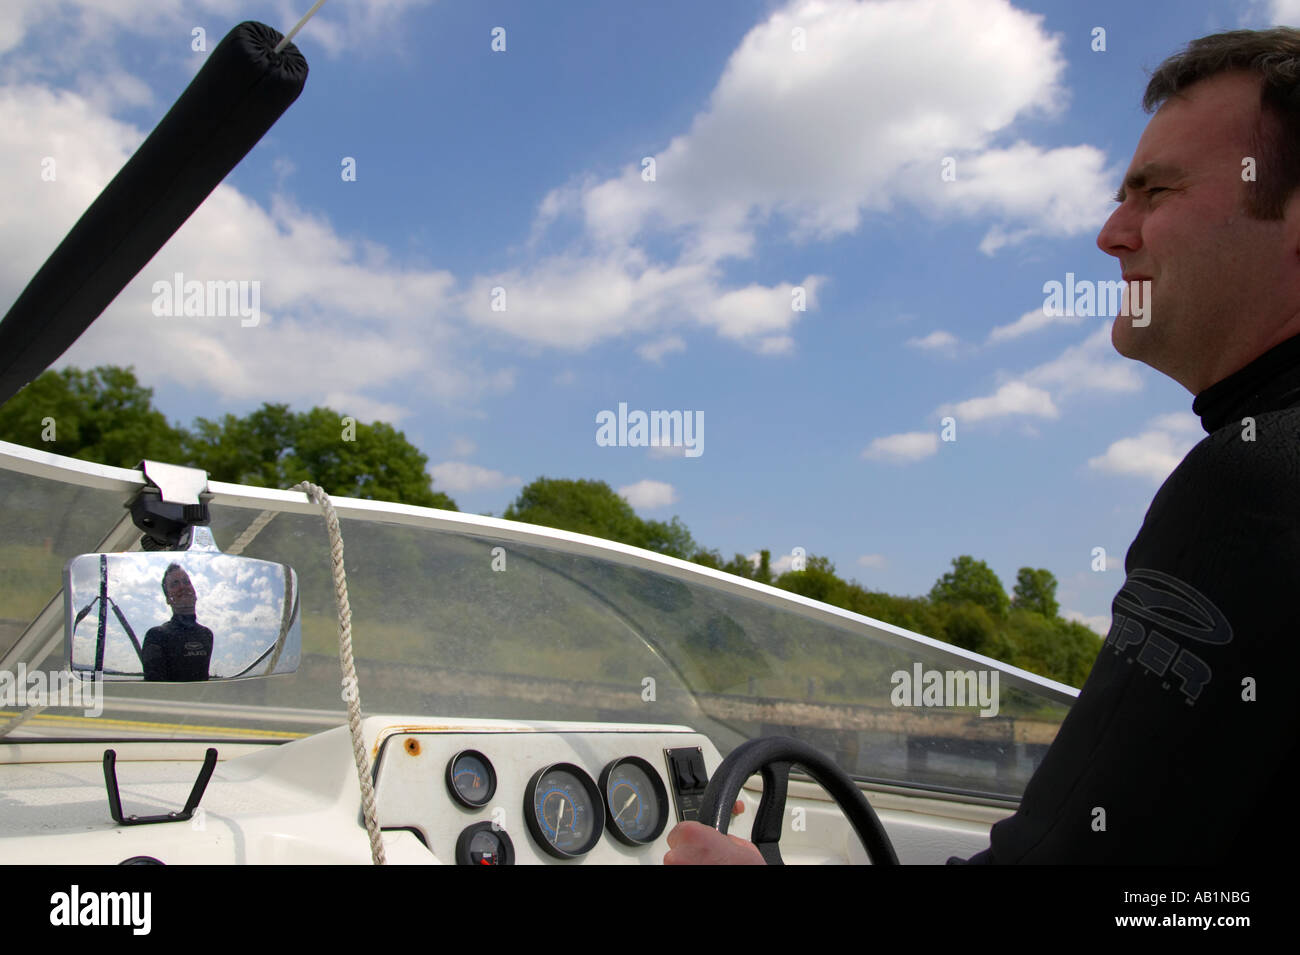 early 30s dark haired man driving speedboat during waterski session with blue cloudy sky looking front Stock Photo